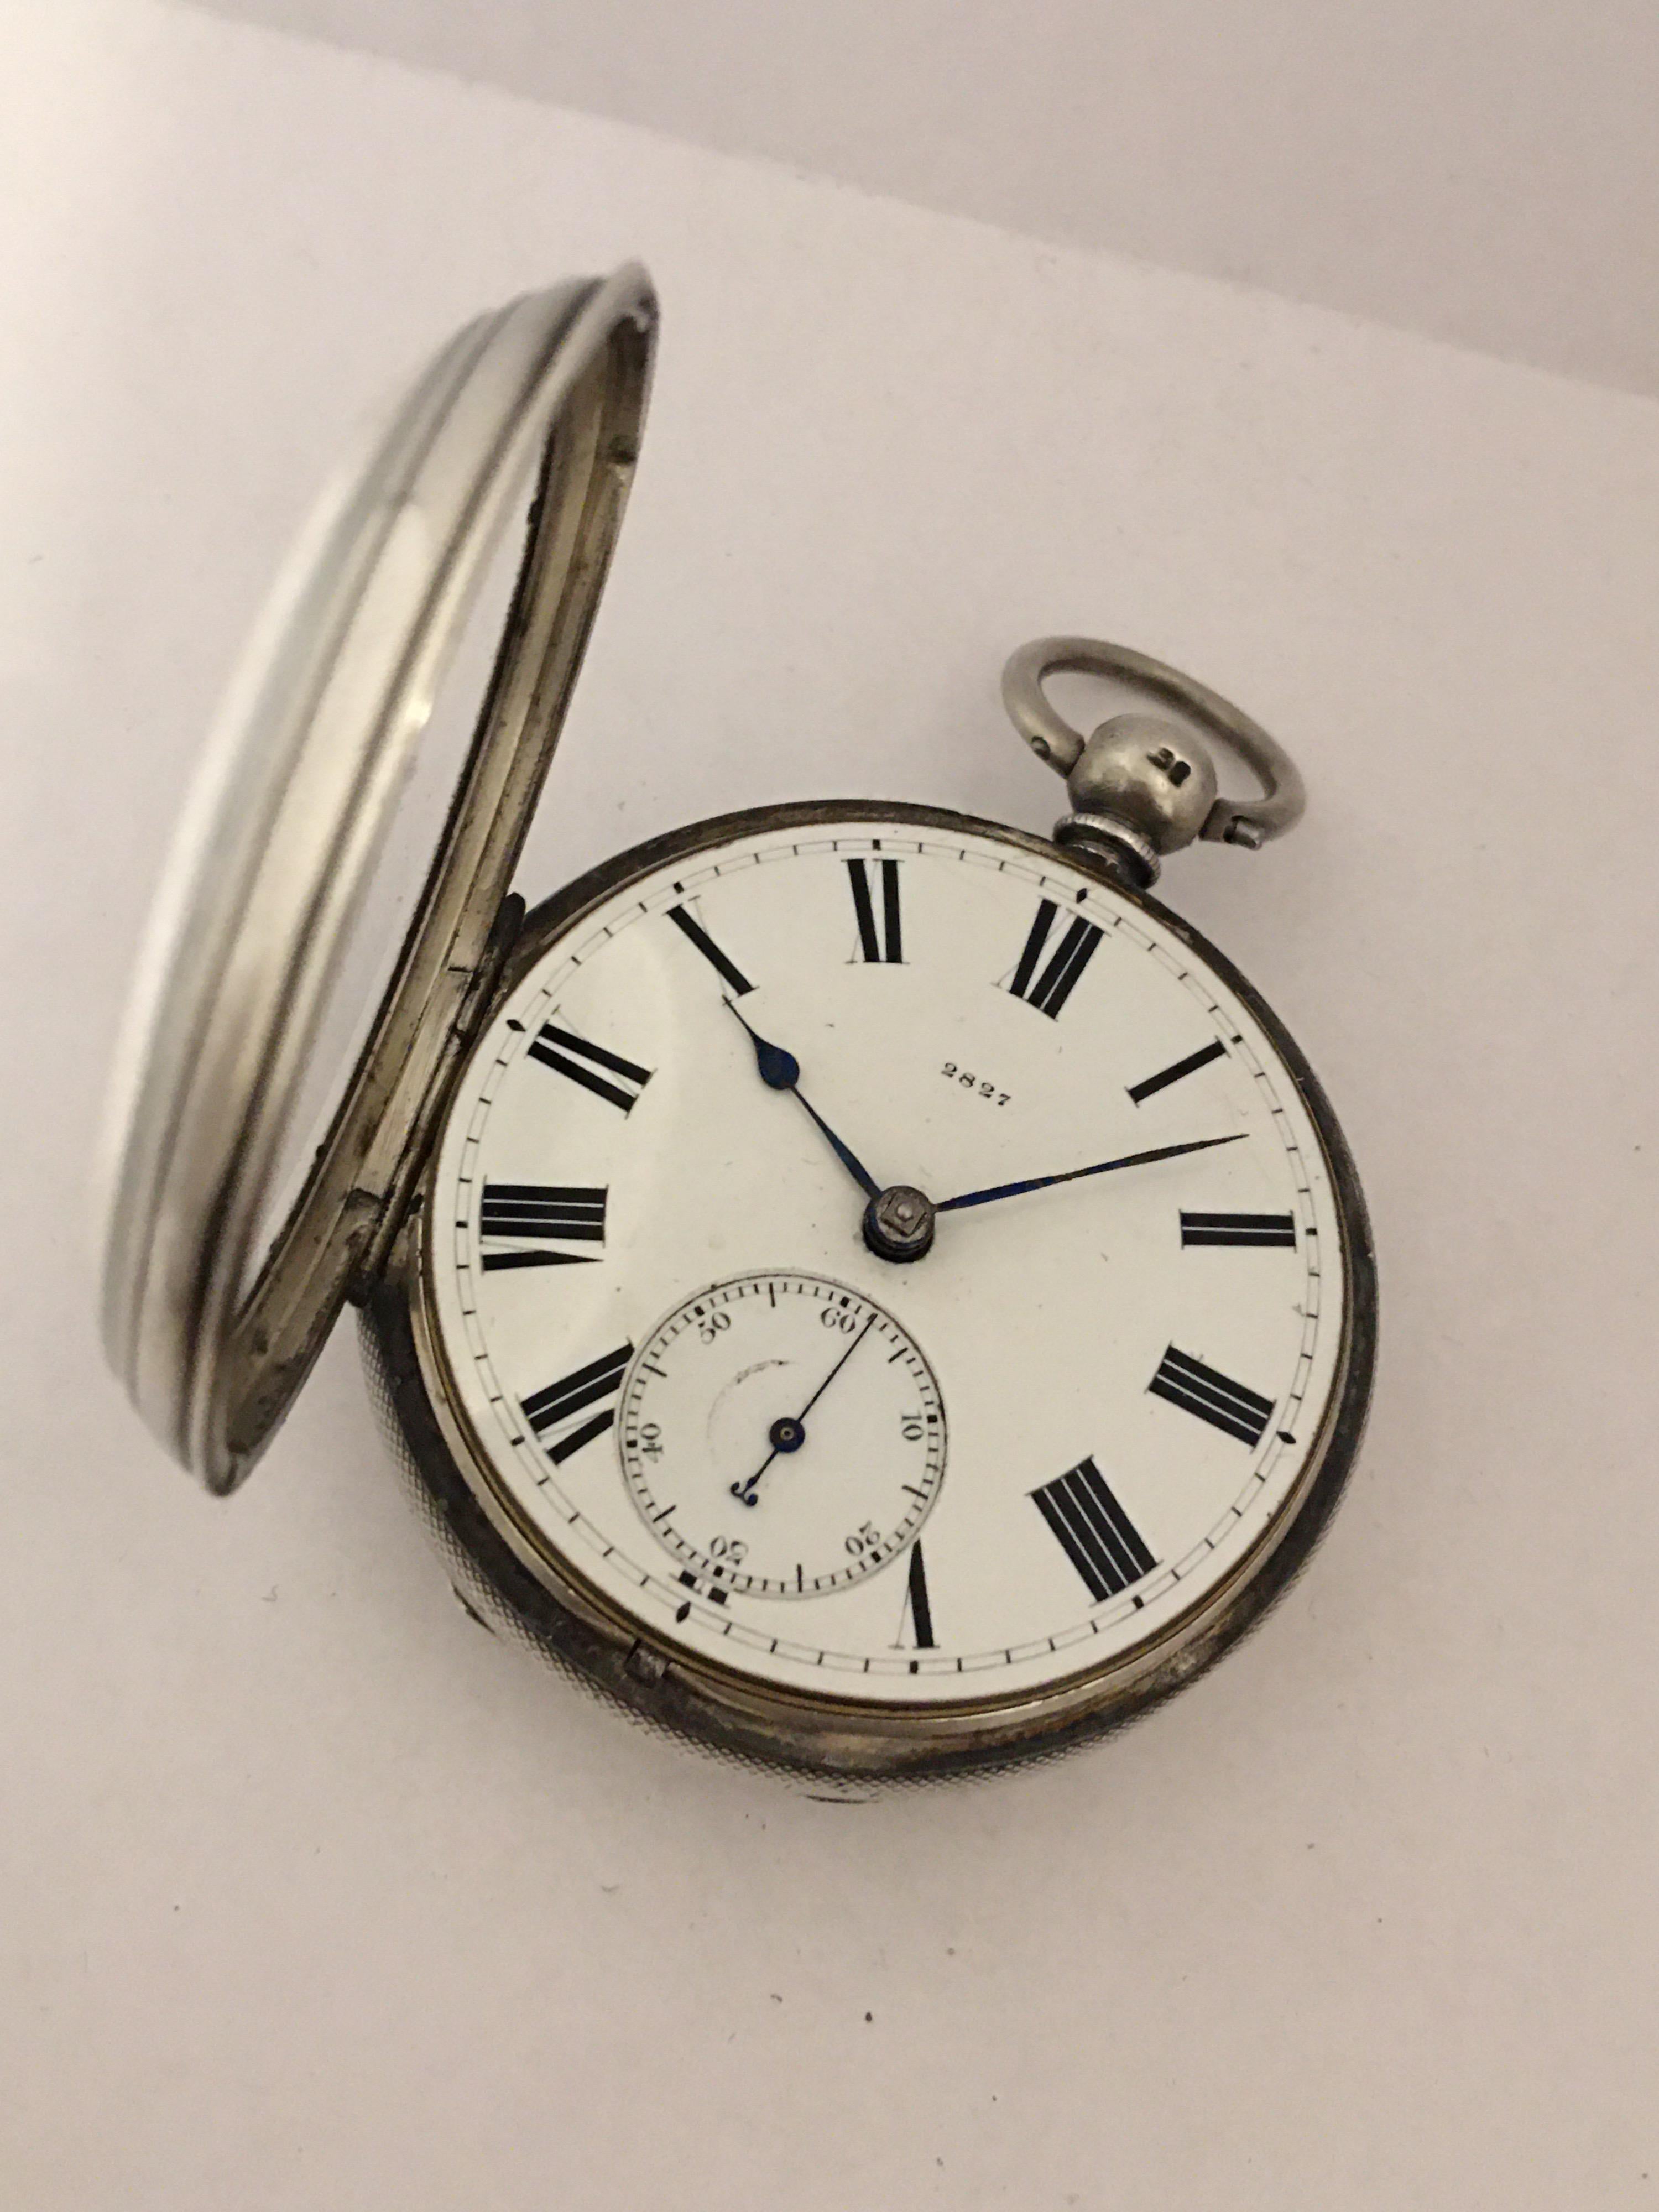 Victorian silver fusee lever pocket watch, London 1866, unsigned movement, no. 2827 with engraved balance cock, diamond endstone, steel three arm balance and silvered regulating scale, dust cover, the dial numbered 2827 with Roman numerals, minute